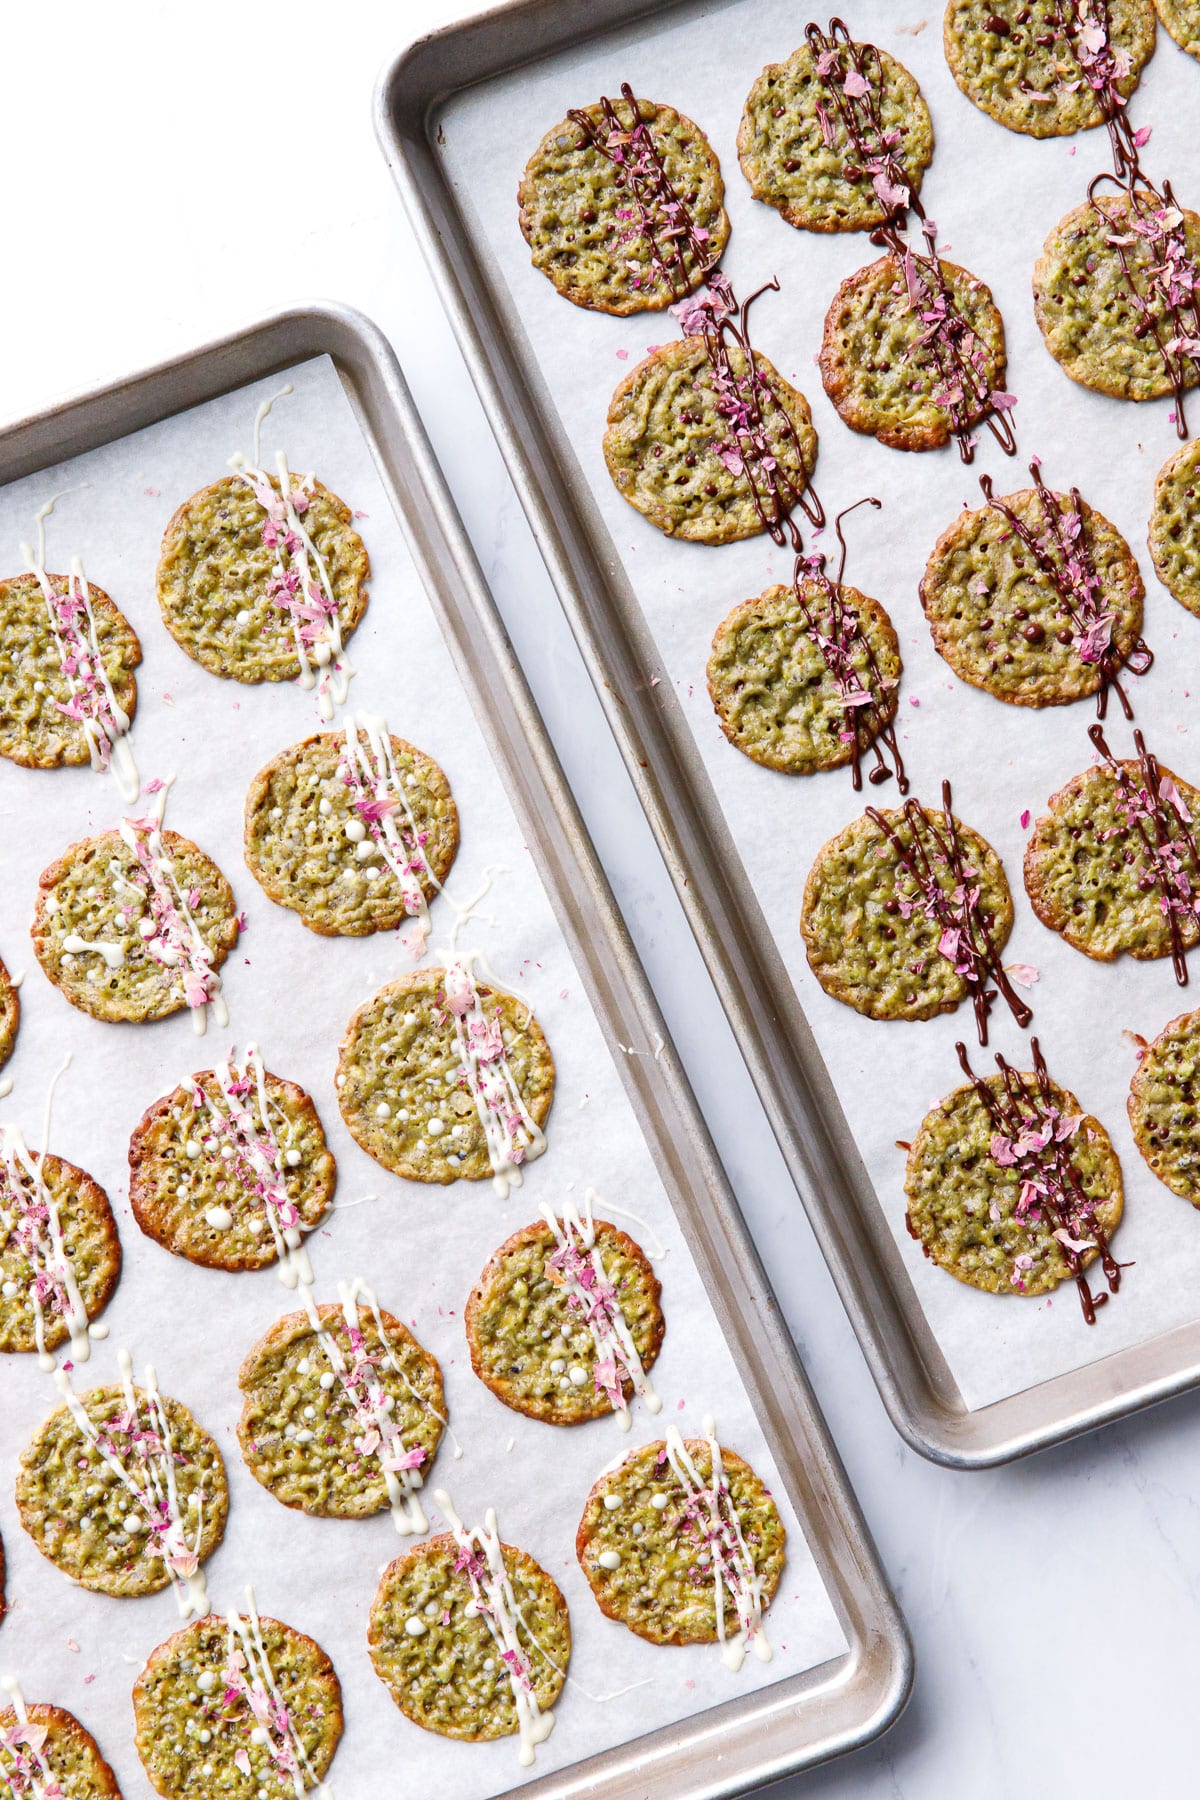 Two sheet pans of Pistachio Florentine Cookies on the diagonal, one with dark-chocolate drizzle and one with white chocolate.